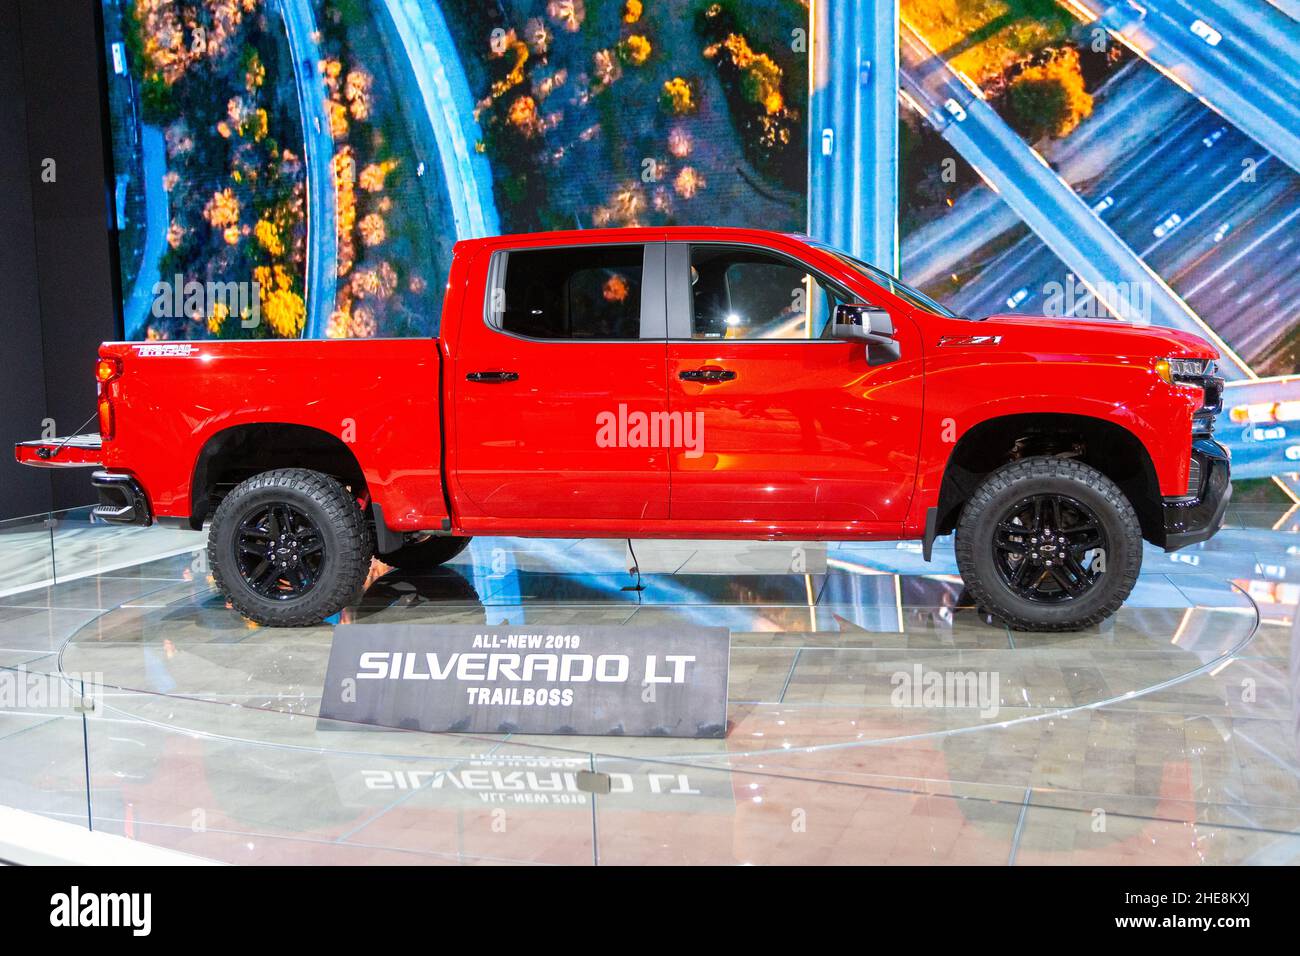 A red Chevrolet Silverado LT pick up truck on display at the 2018 North American International Auto Show in Detroit, Michigan, USA. Stock Photo